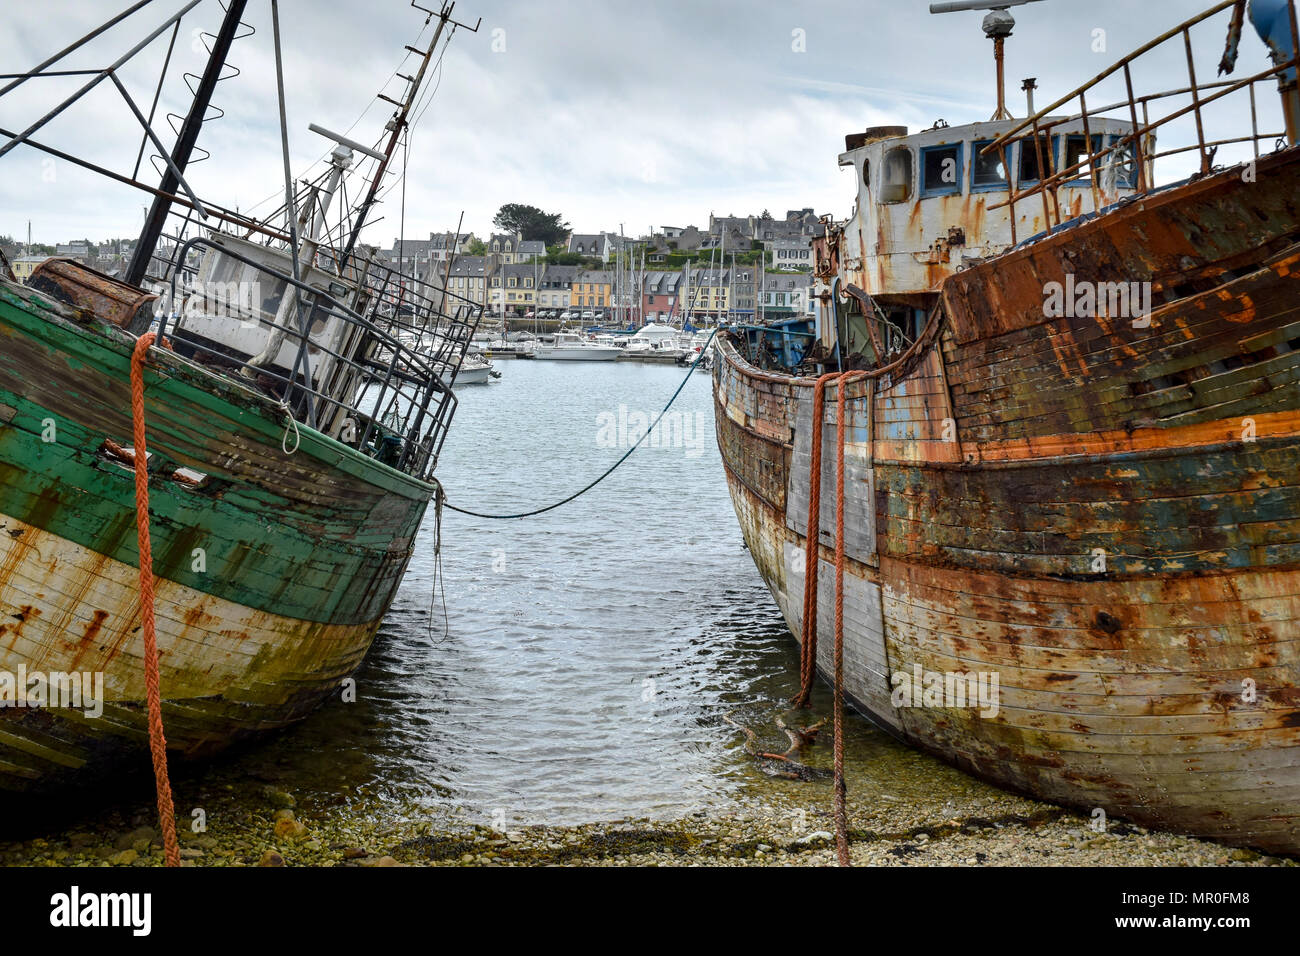 The boat graveyard in Camaret-sur-Mer, Brittany, France. Stock Photo